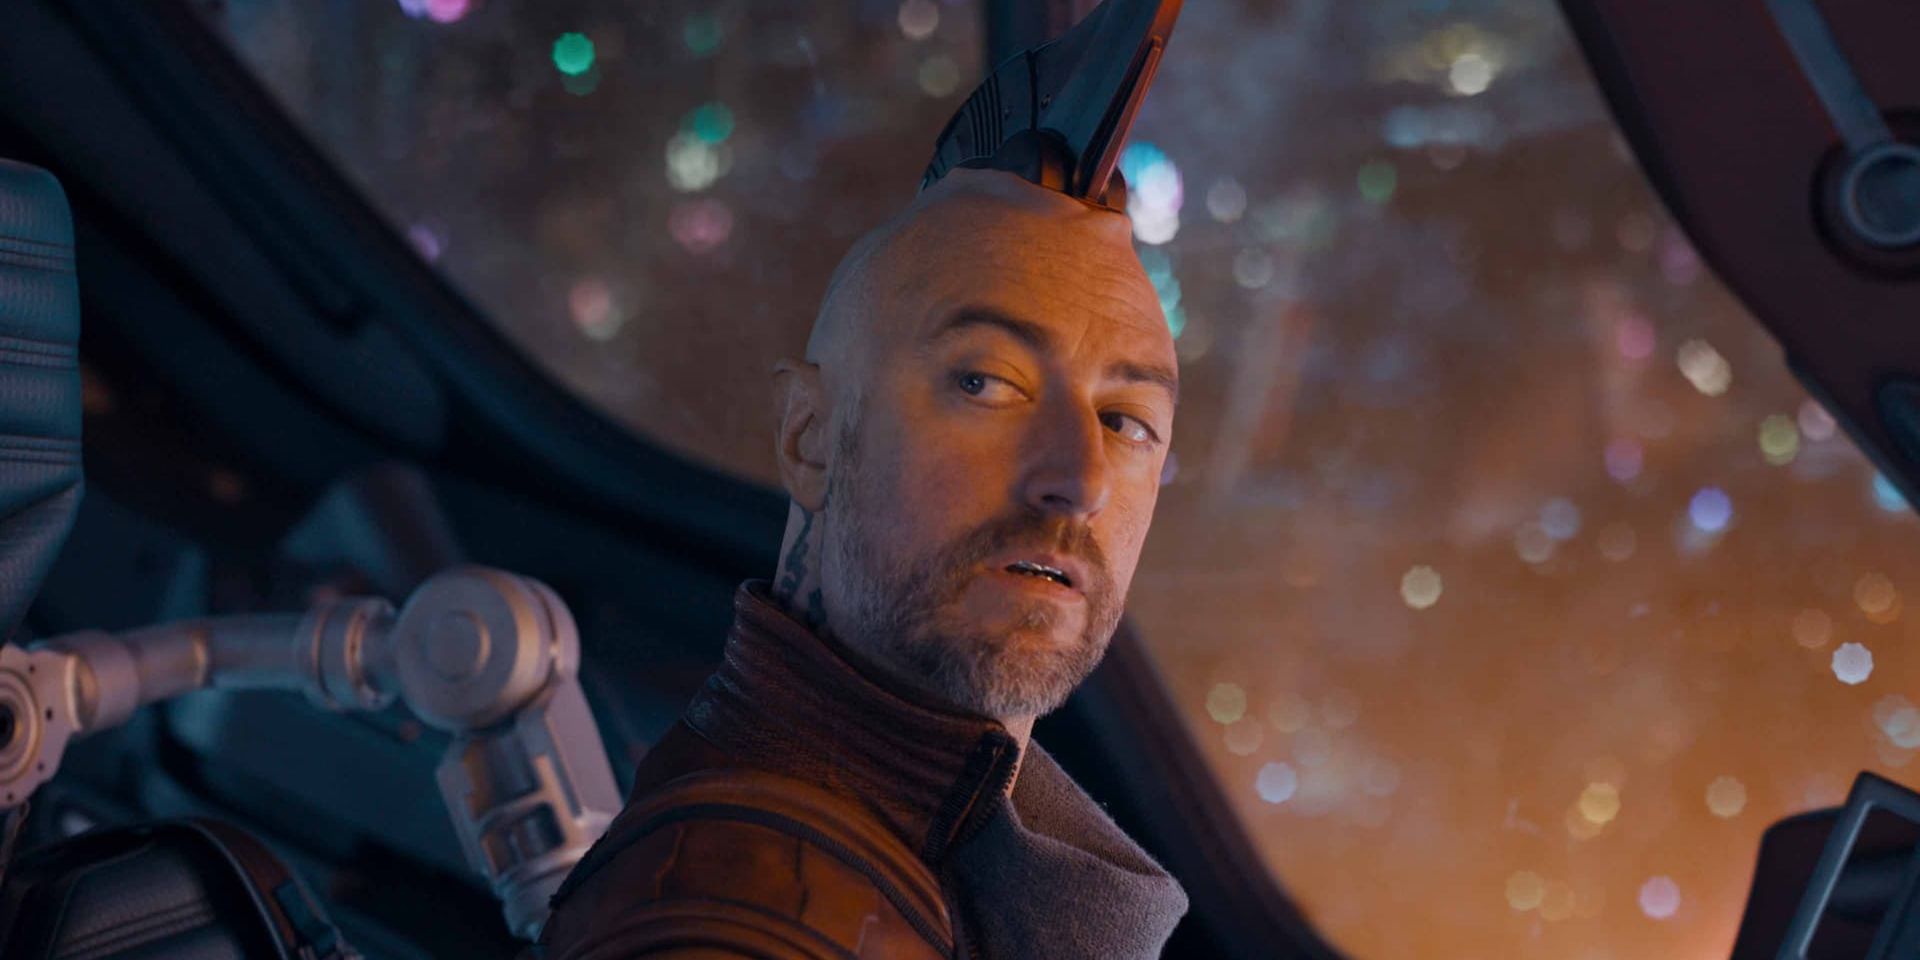 Kraglin, played by Sean Gunn, in The Guardians of the Galaxy Holiday Special looking over shoulder.